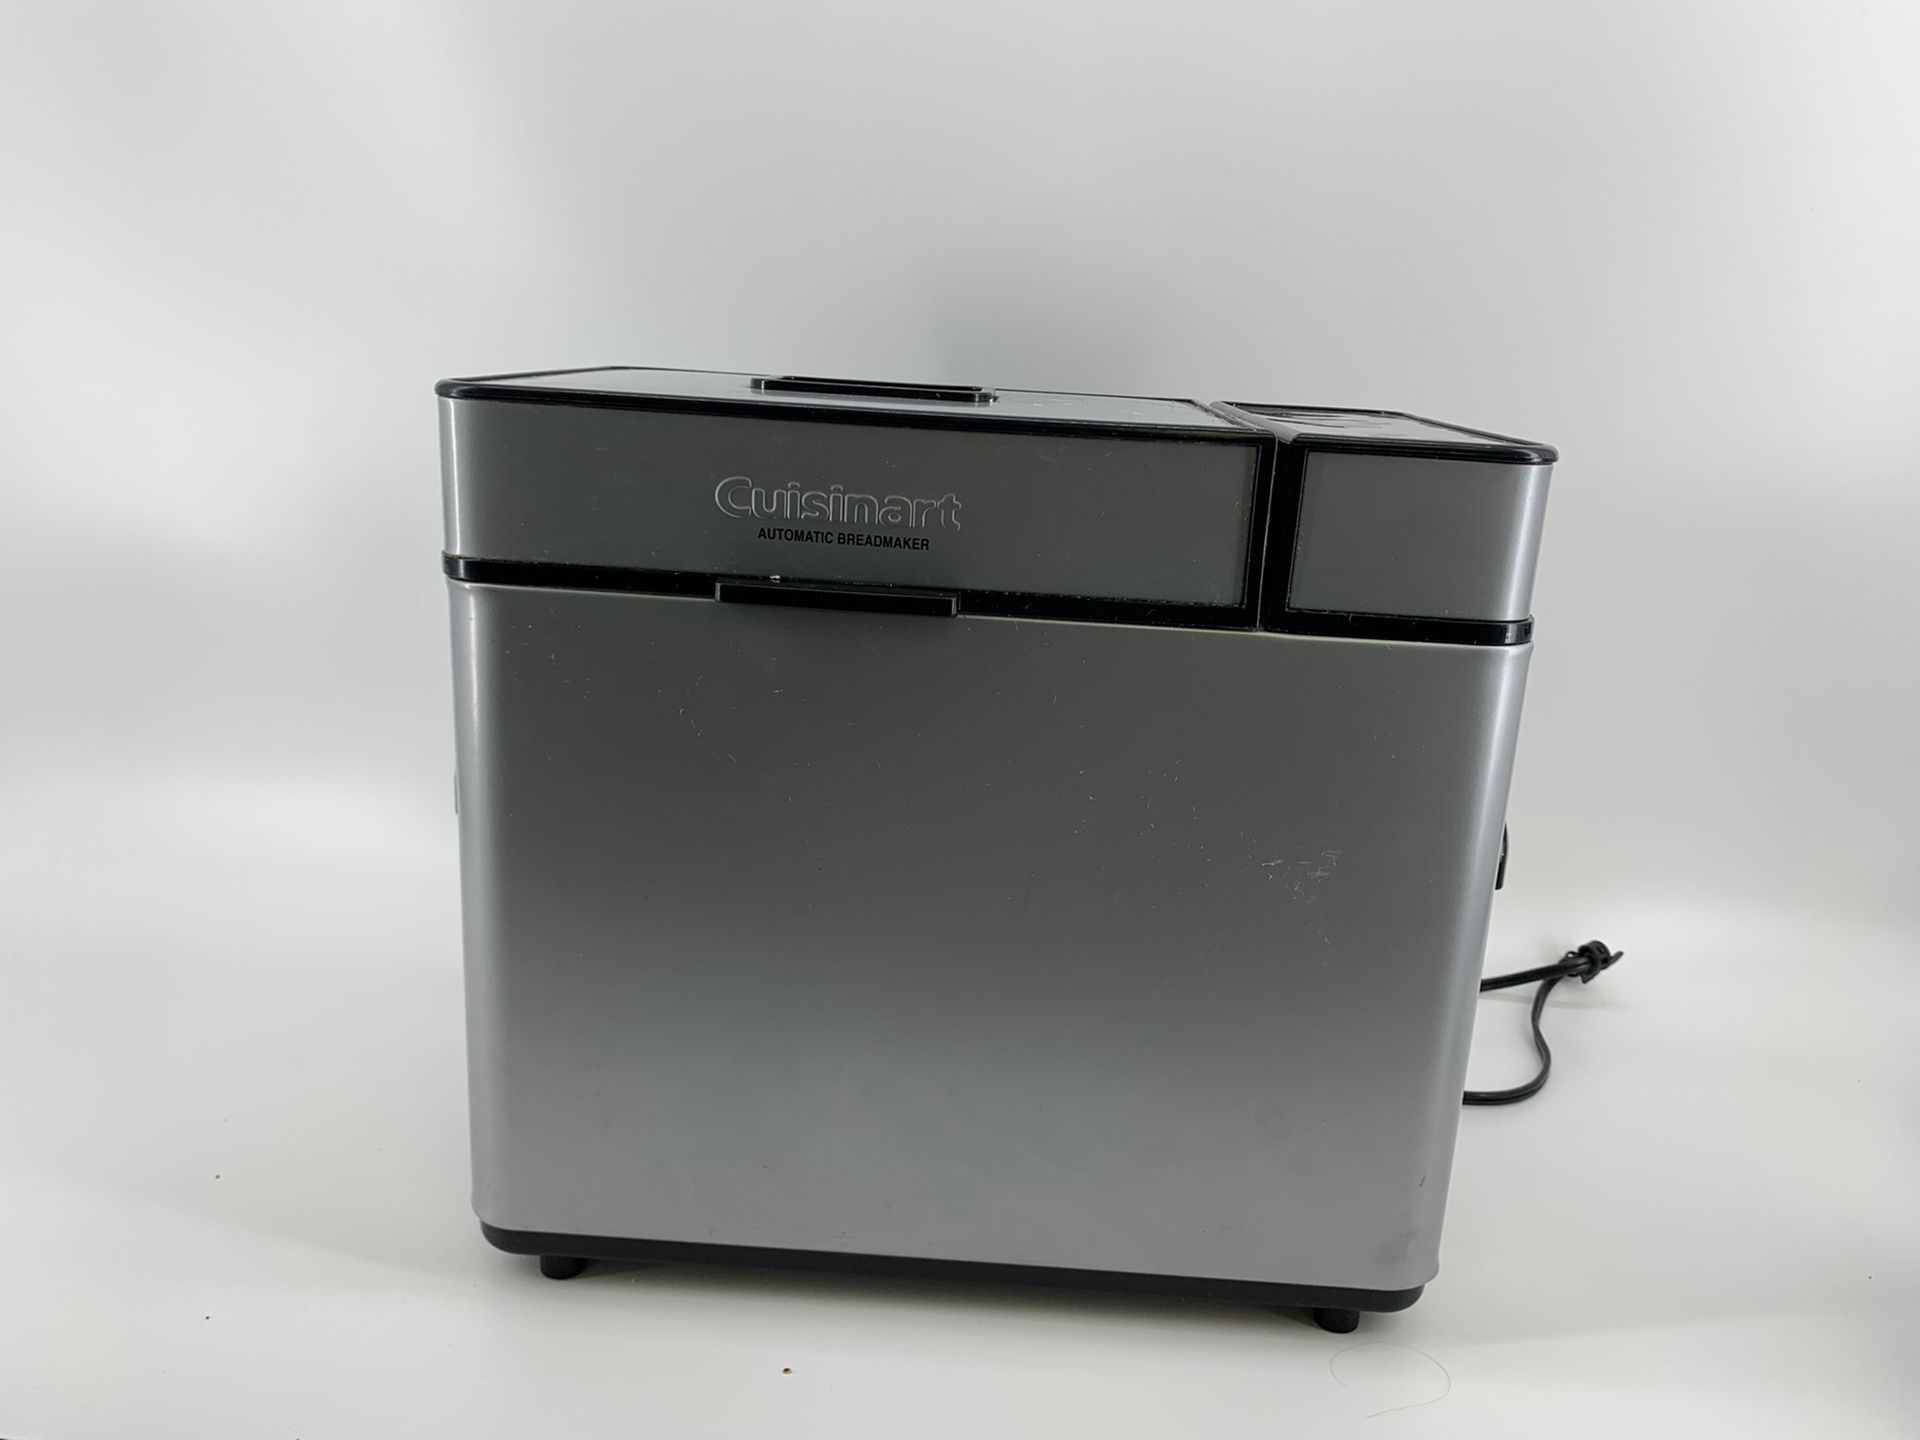 Cuisinart CBK-200 2-Pound Convection Automatic Programmable Bread Maker Stainles#13